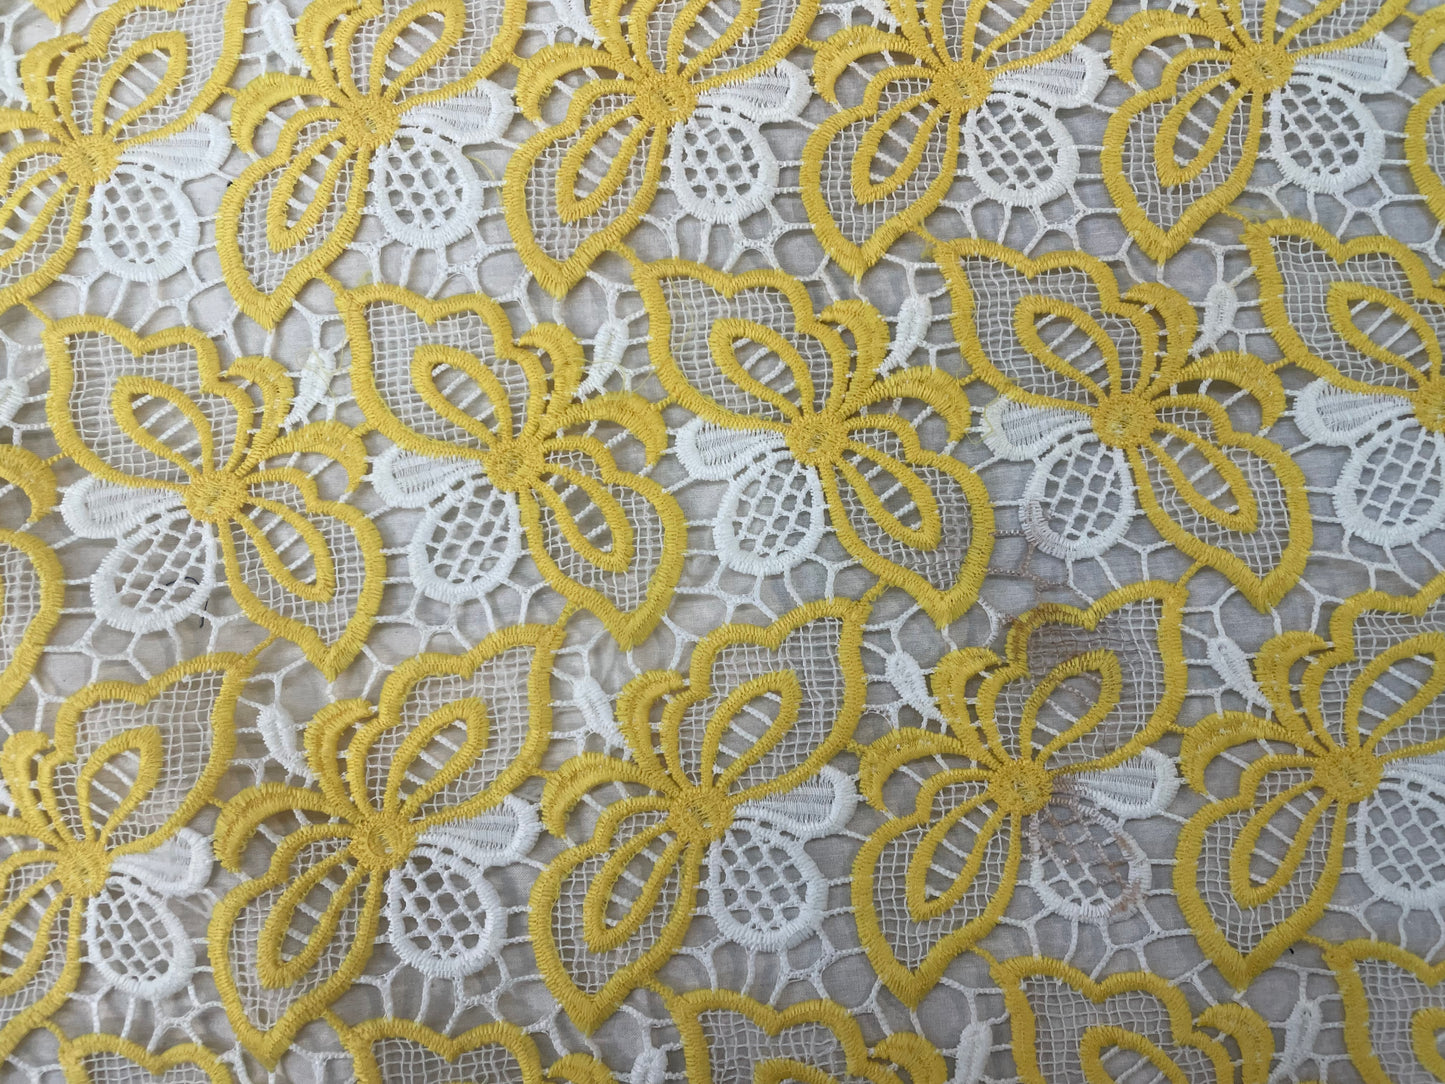 Floral Appliqued Cotton Lace - Summer Yellow & White